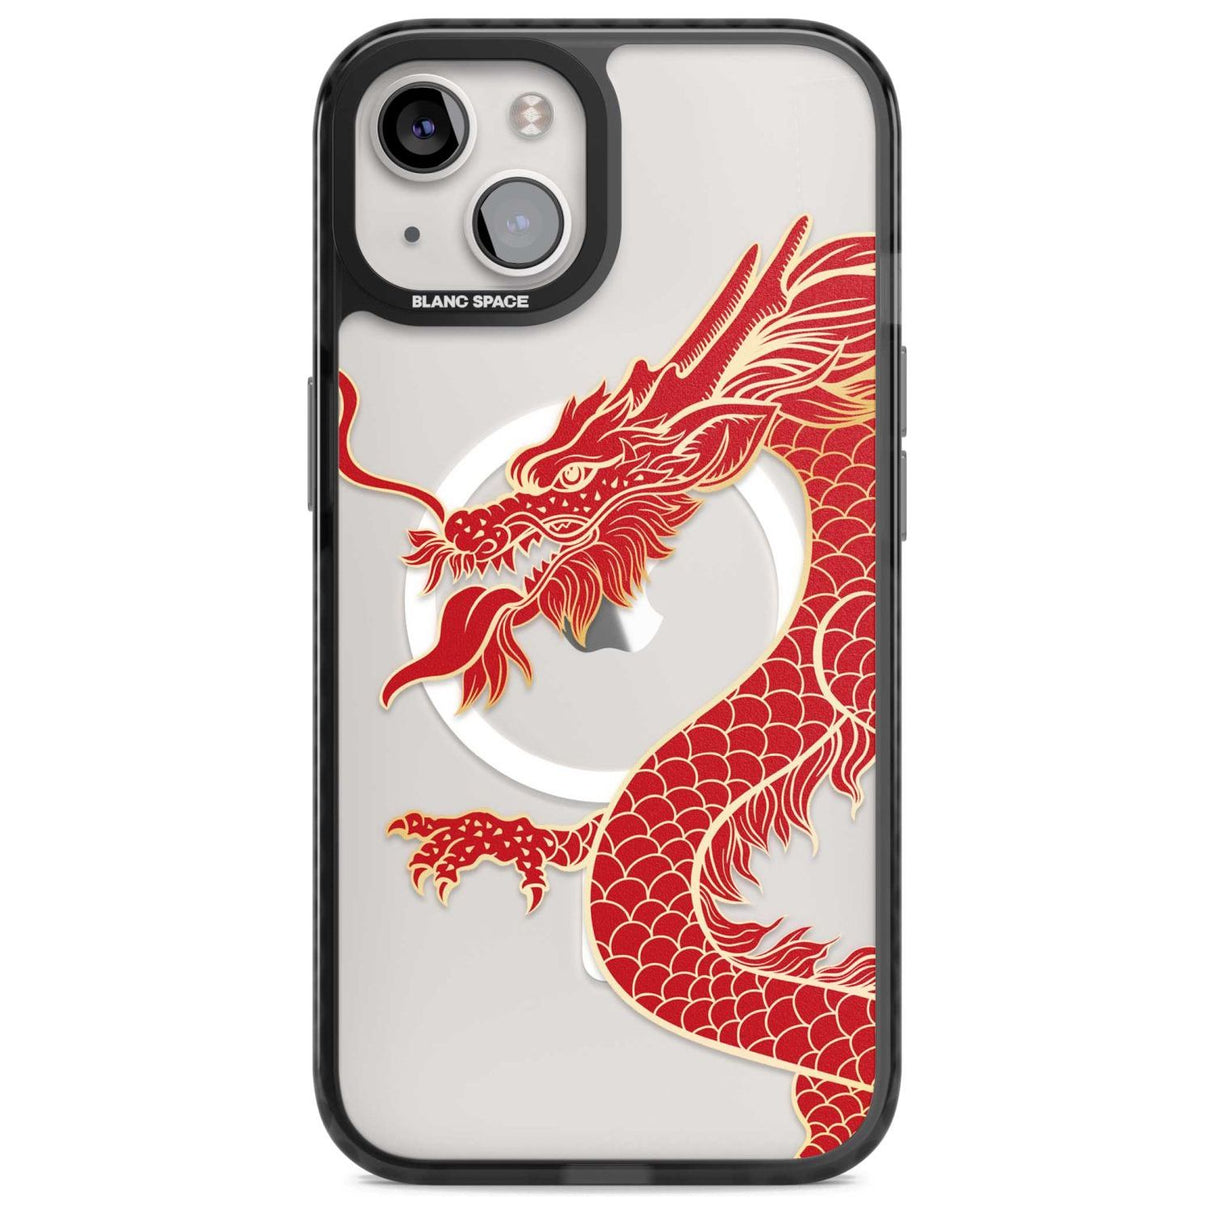 Large Red Dragon Phone Case iPhone 15 Plus / Magsafe Black Impact Case,iPhone 15 / Magsafe Black Impact Case,iPhone 14 Plus / Magsafe Black Impact Case,iPhone 14 / Magsafe Black Impact Case,iPhone 13 / Magsafe Black Impact Case Blanc Space